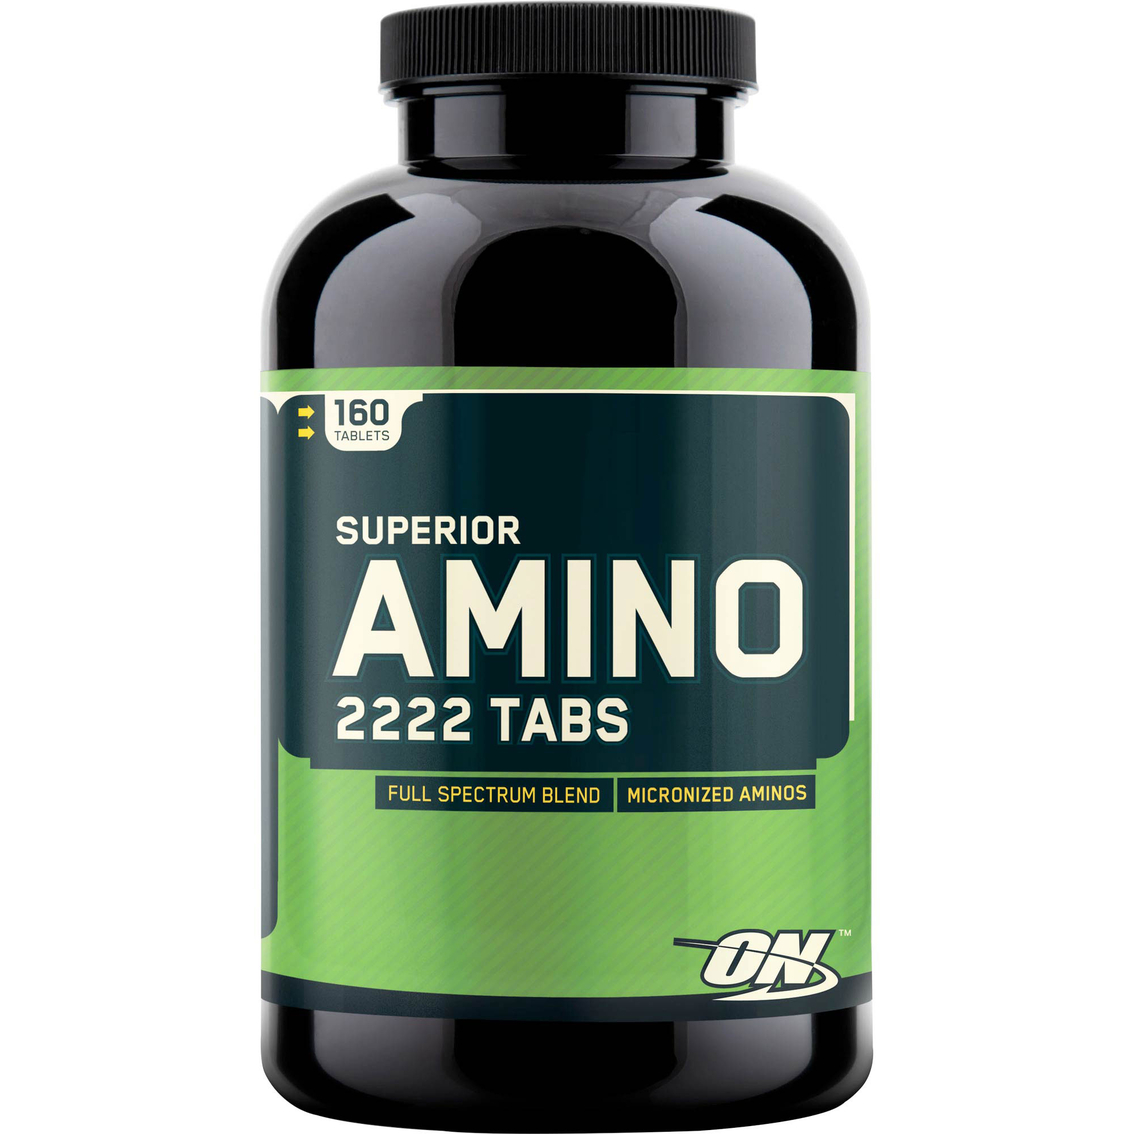 Amazon.com: pre Workout Amino acids Supplements - BCAA 3000 MG - bcaa Amino  acids Supplements - 2 Bottles 240 Tablets : Health & Household